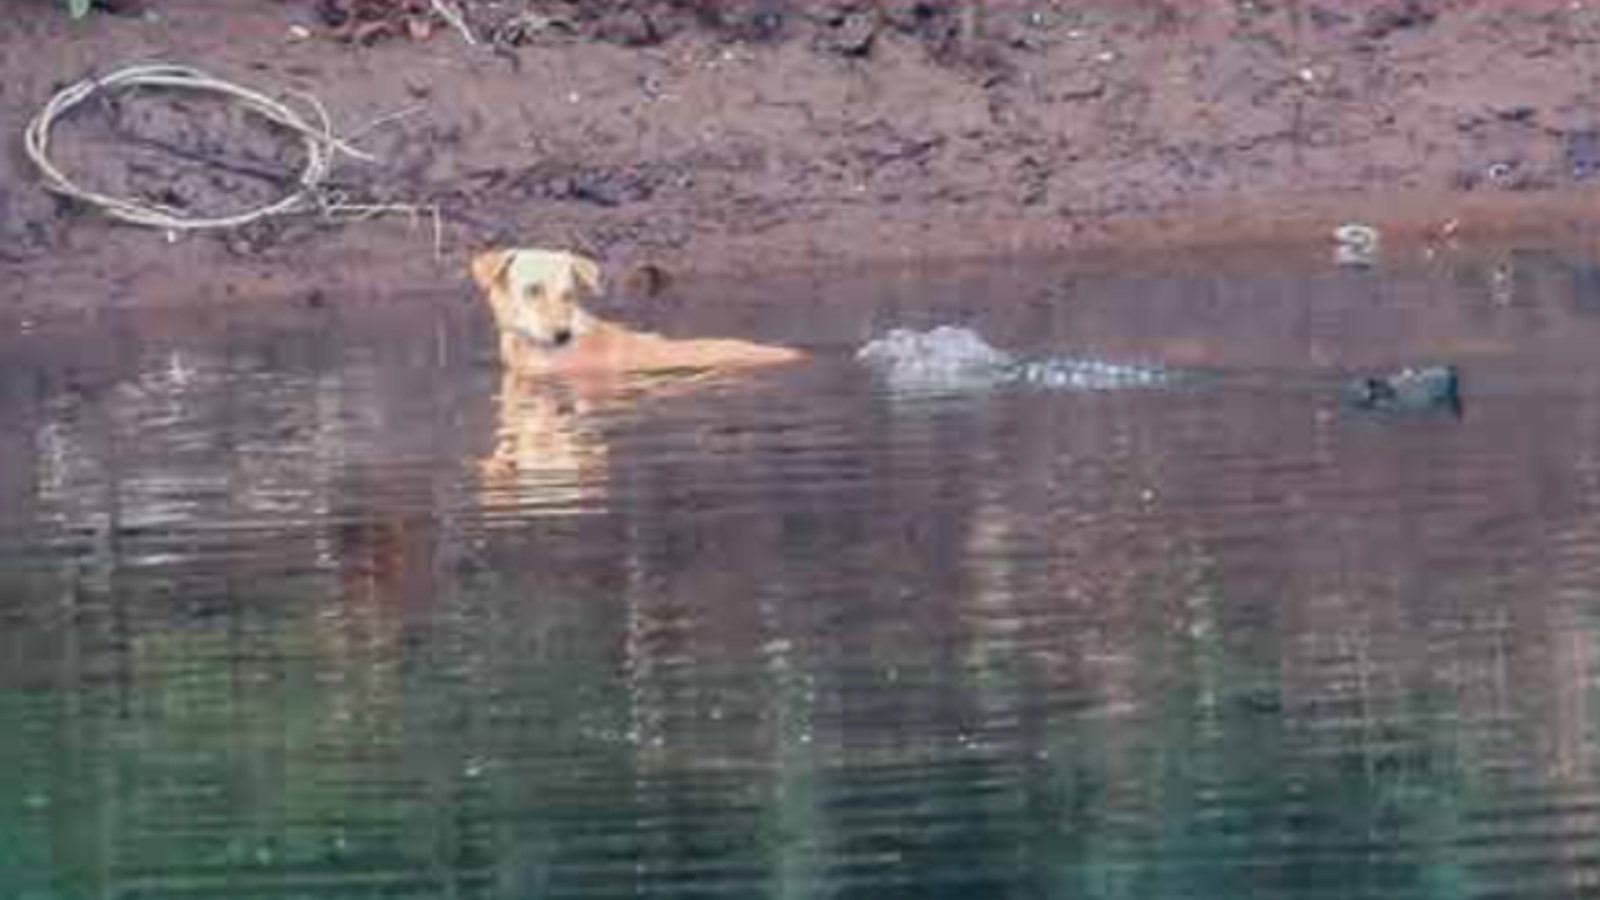 Crocodiles save dog stranded in river instead of eating it - in possible case of 'emotional empathy'